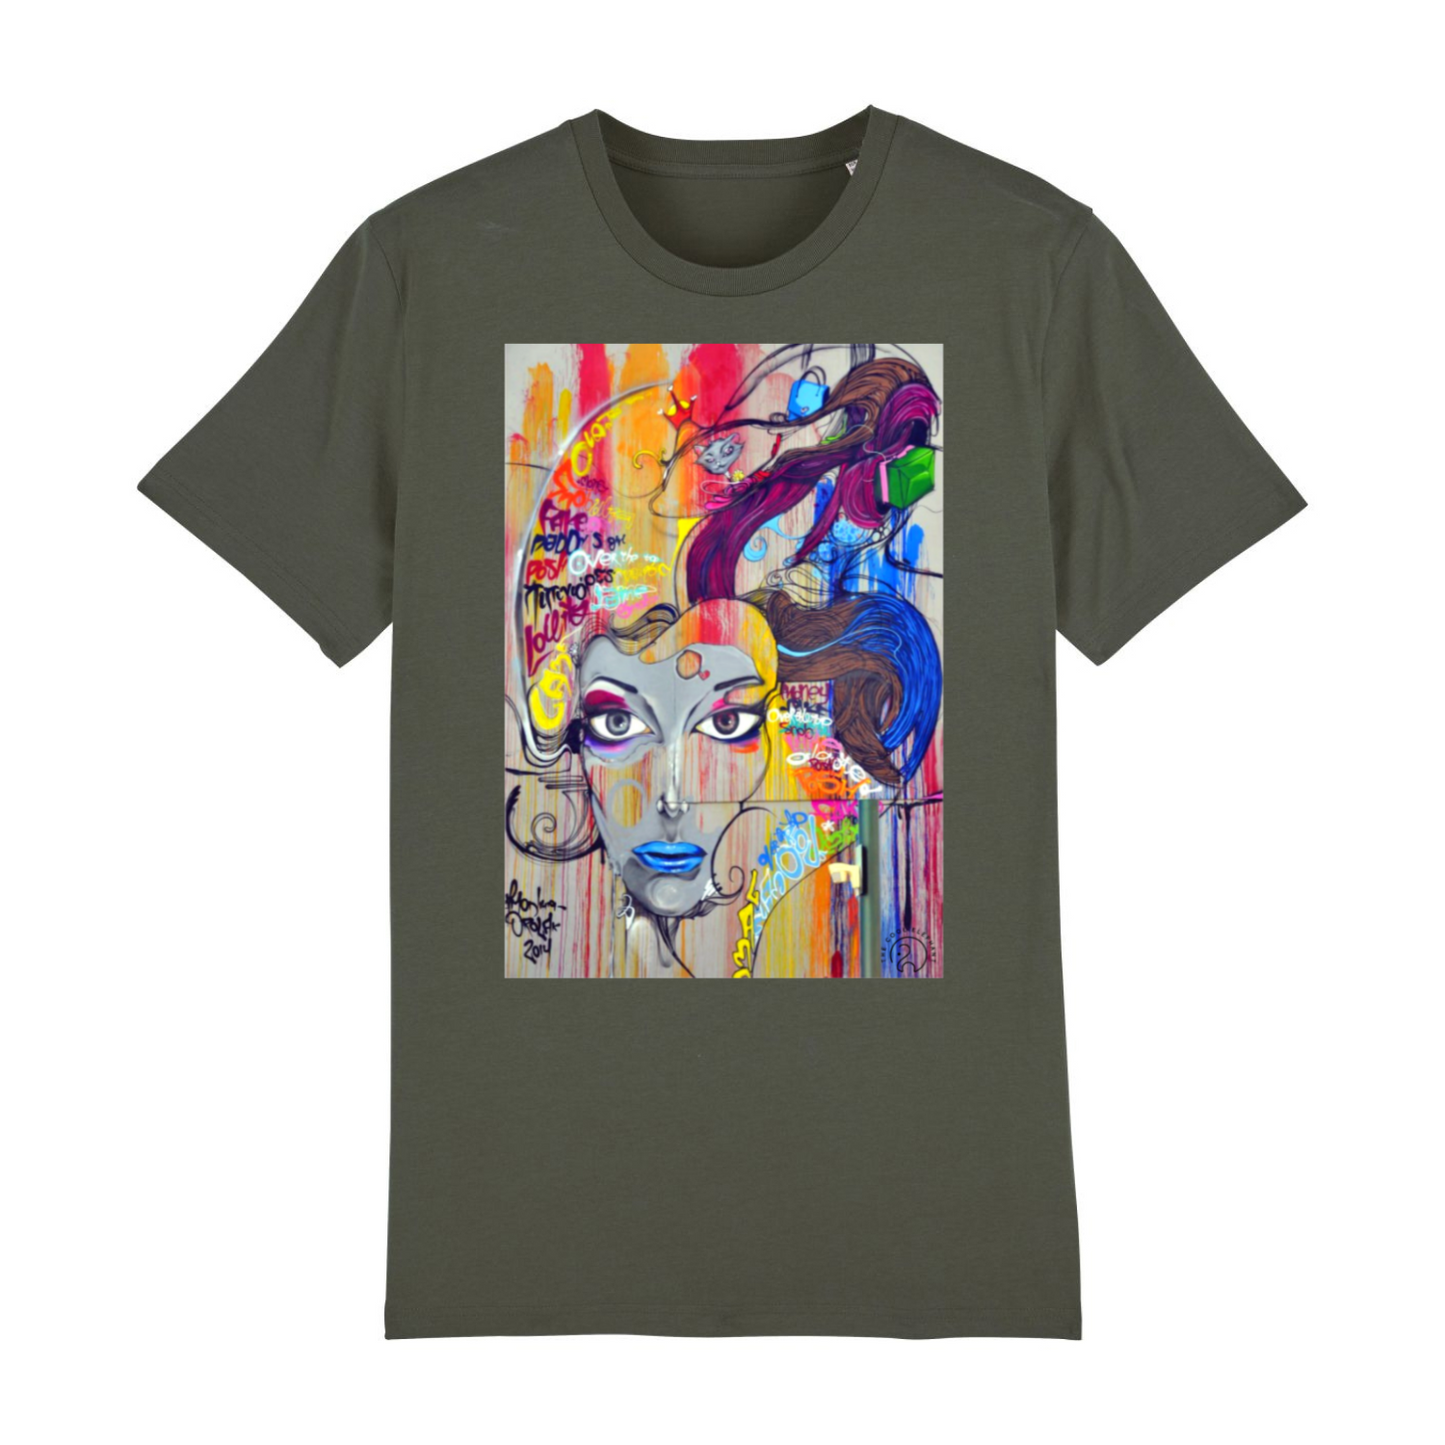 T-Shirt "Painted Woman"